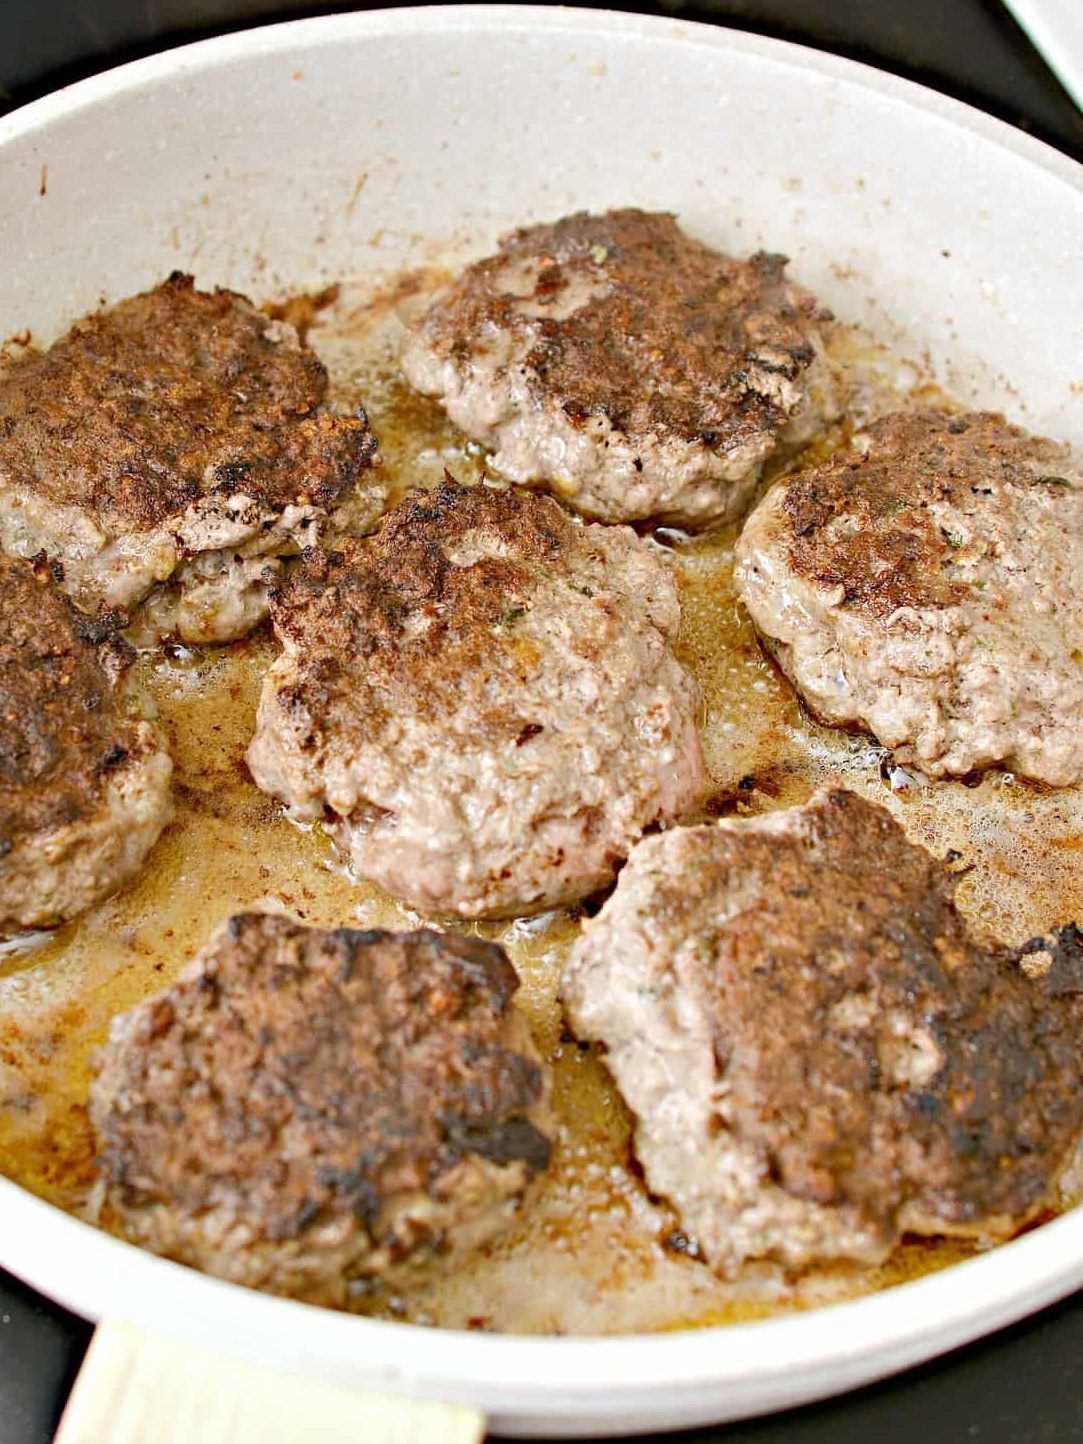 Heat a skillet over medium-high heat on the stove, and cook the patties until done to your liking. Remove and keep warm.